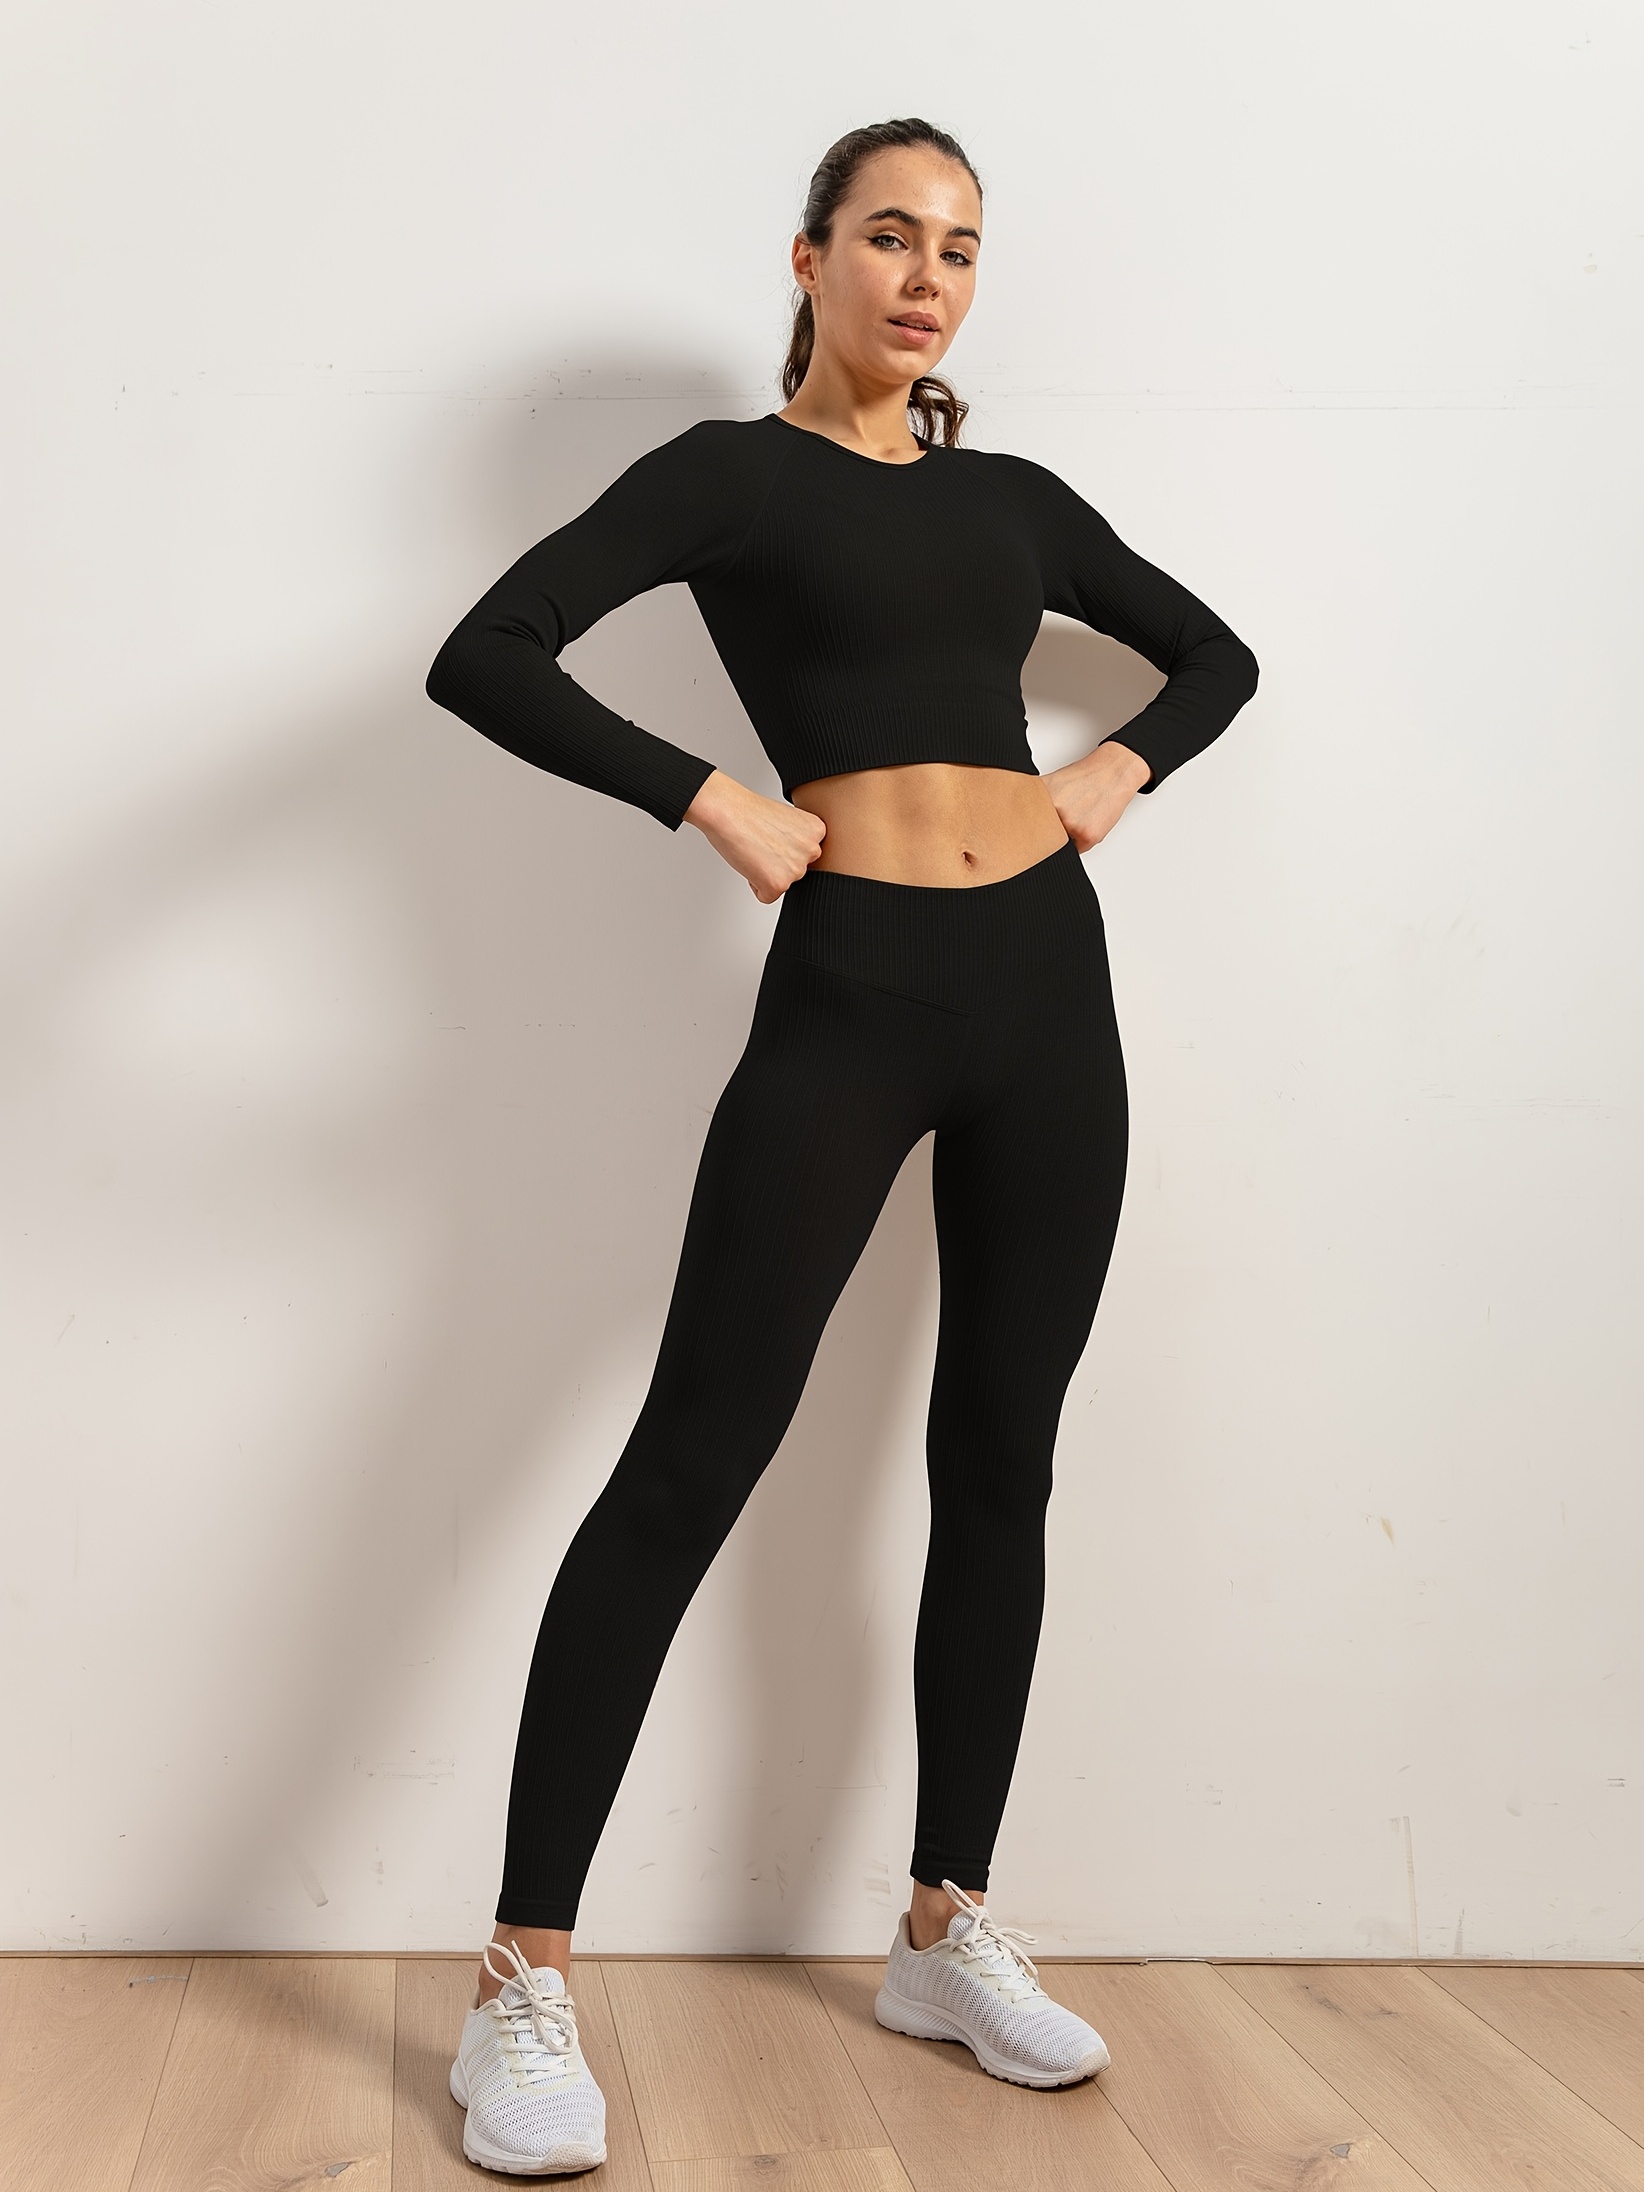 Women 2 Piece Sets Seamless Workout Fitness Long sleeve Top Leggings Yoga  Suits Unbranded (Black, Small) 